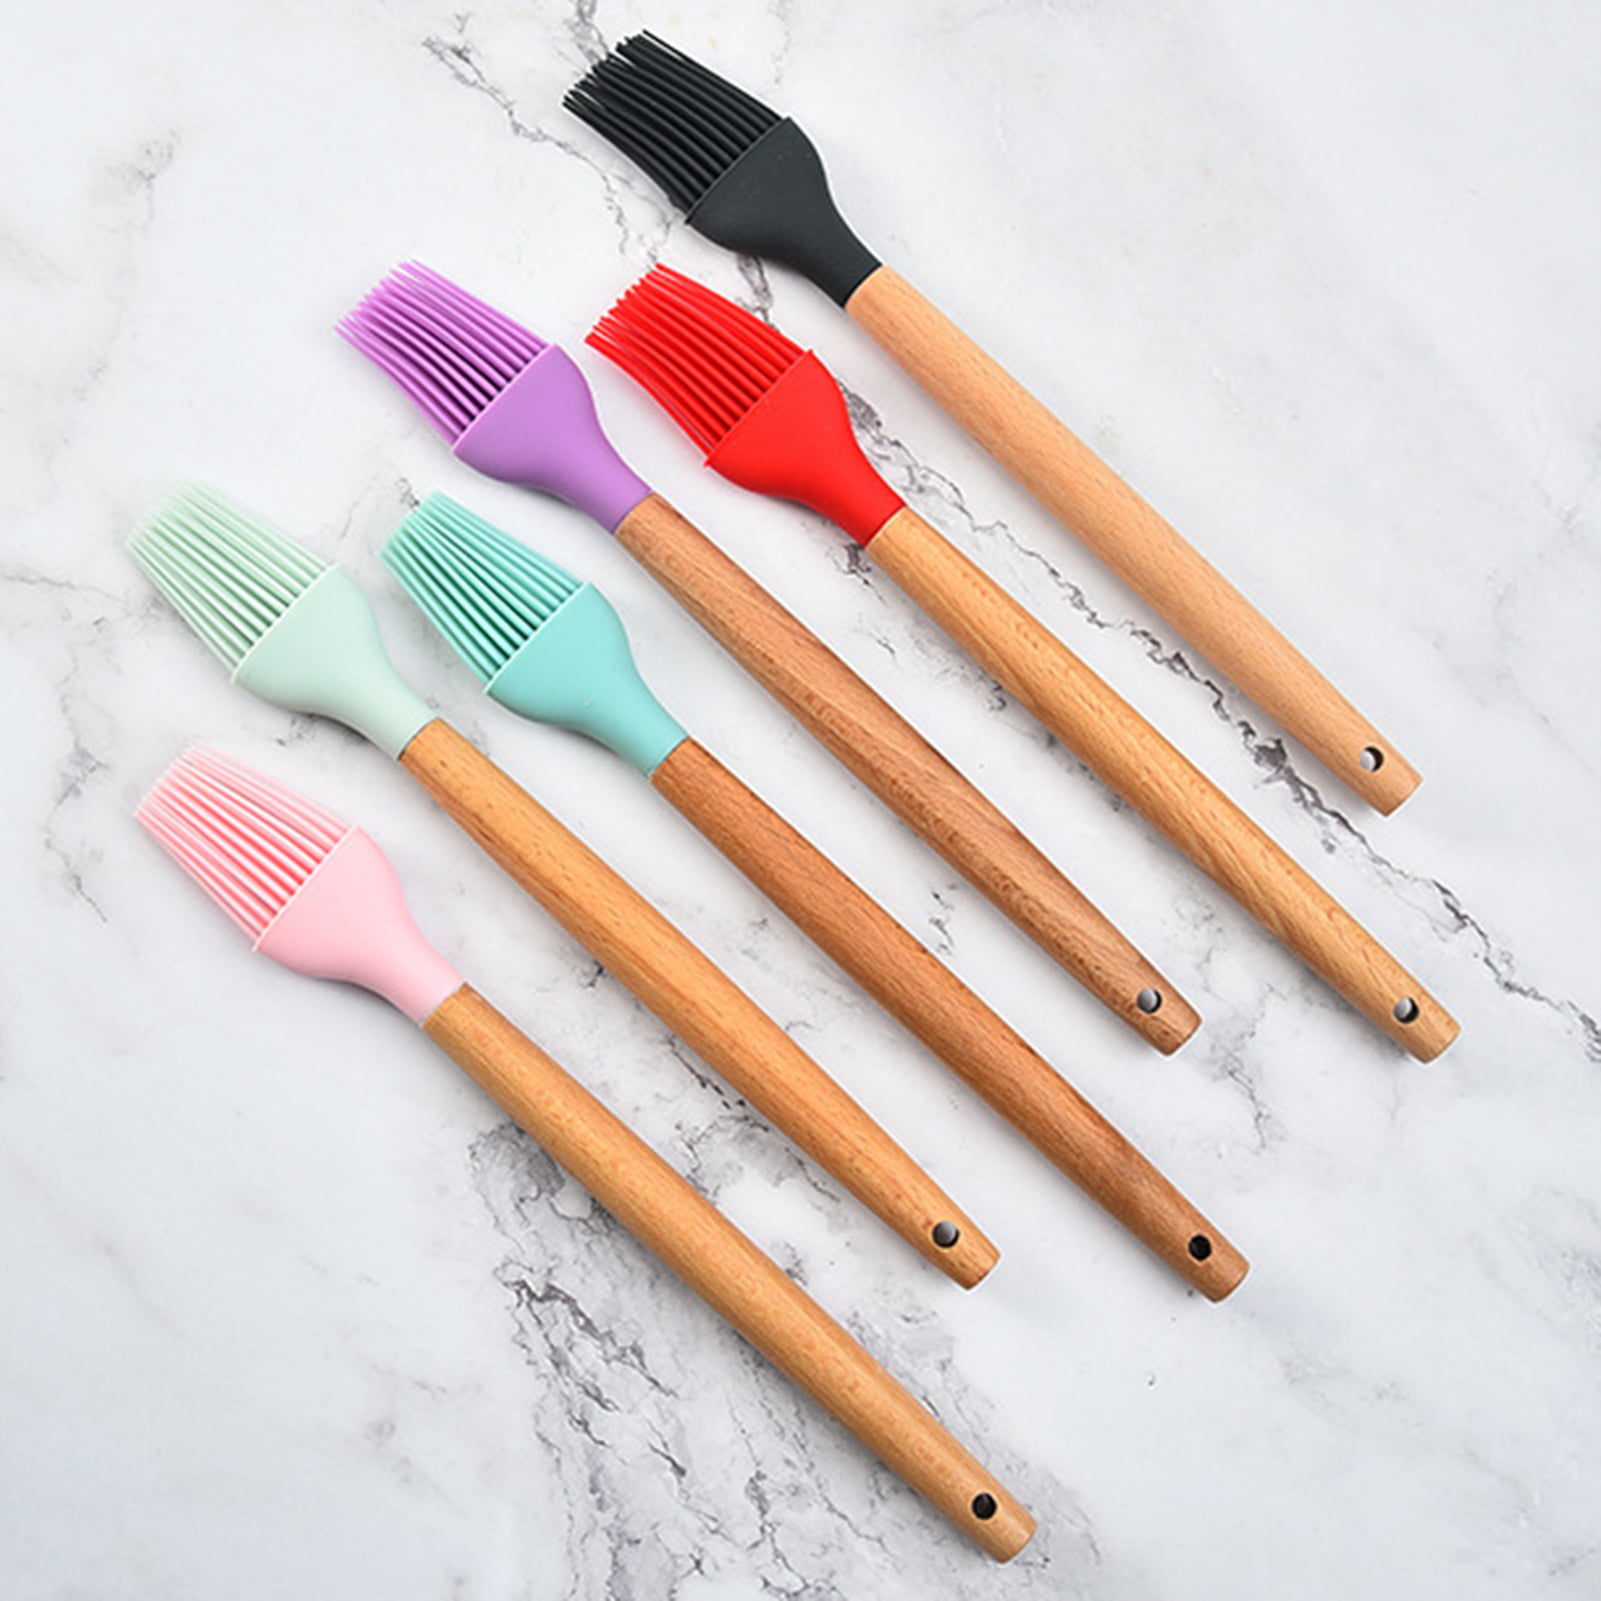 5413 Silicone Cooking Bakeware Bread Pastry Oil BBQ Basting Brush